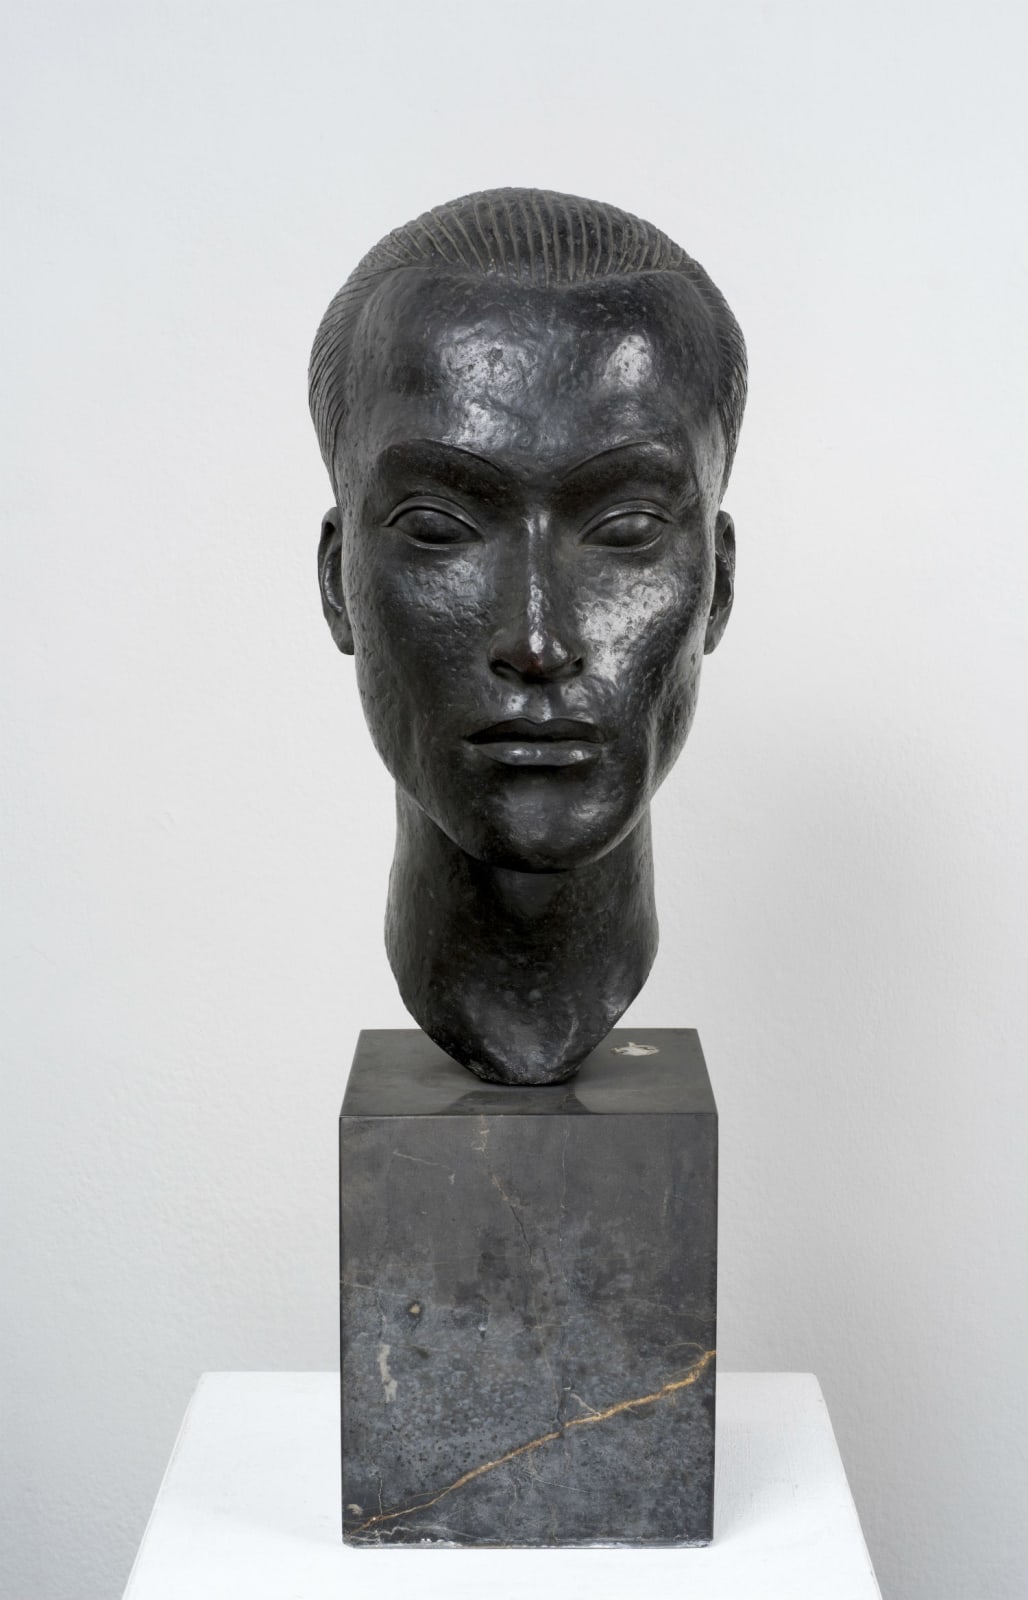 Elsa Fraenkel (1892-1975) Head of Chungsen Chou 1928 Bronze 36 x 20.5 x 55 cm Ben Uri Collection © Elsa Fraenkel estate To see and discover more about this artist click here